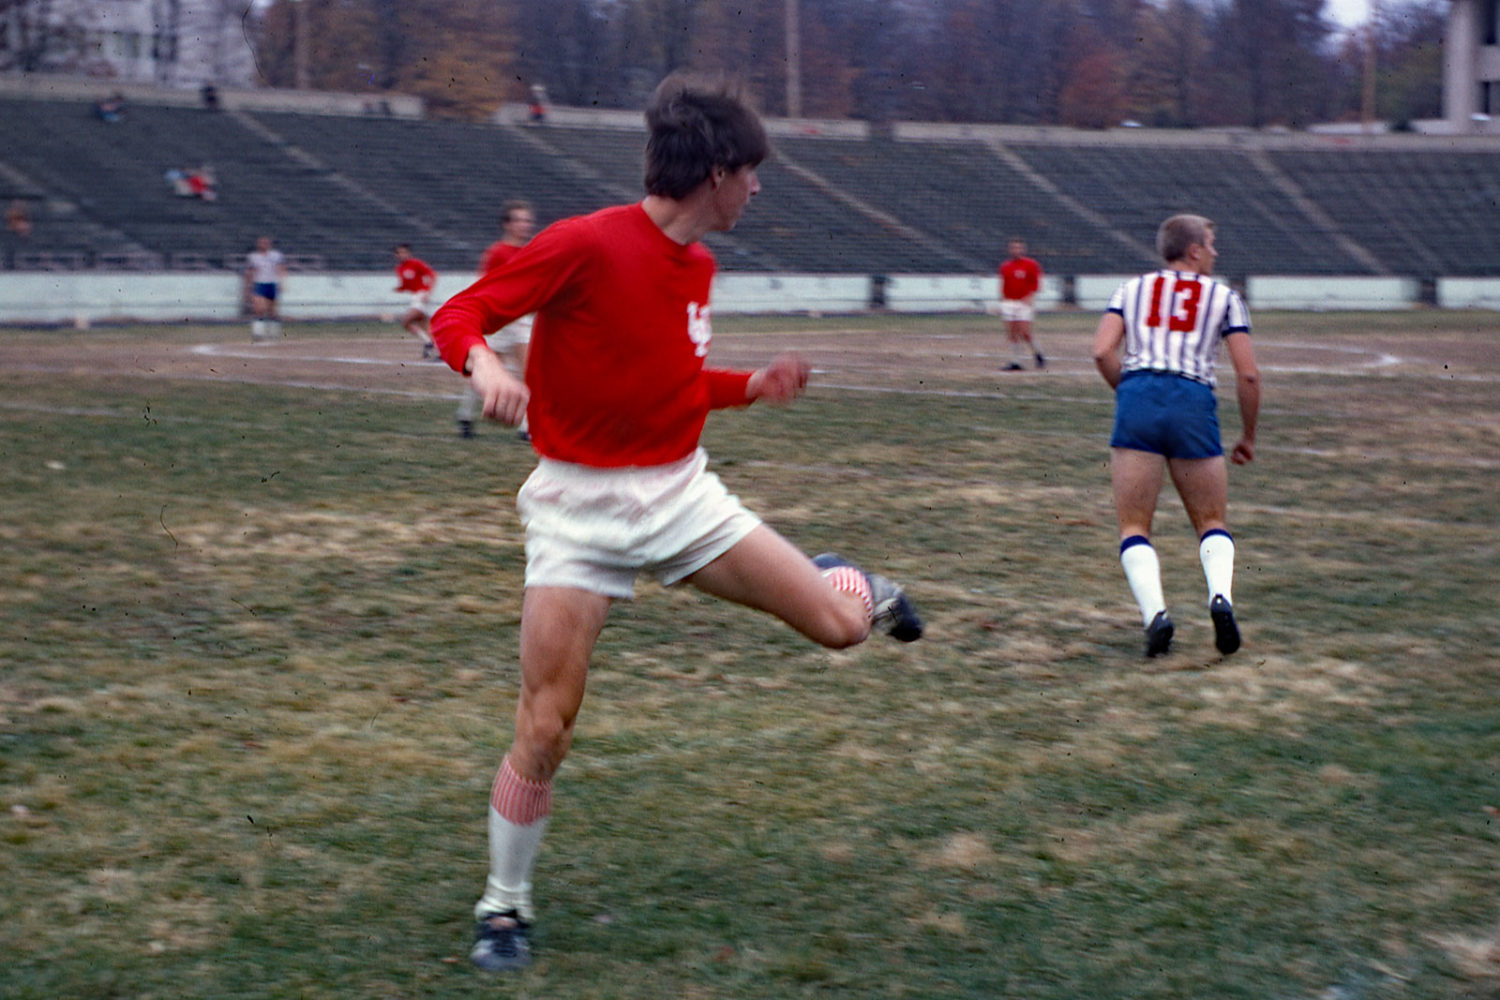 Paul playing soccer at IU in the old football stadium vs. St. Louis 1968. Photo by Leo Dodd.